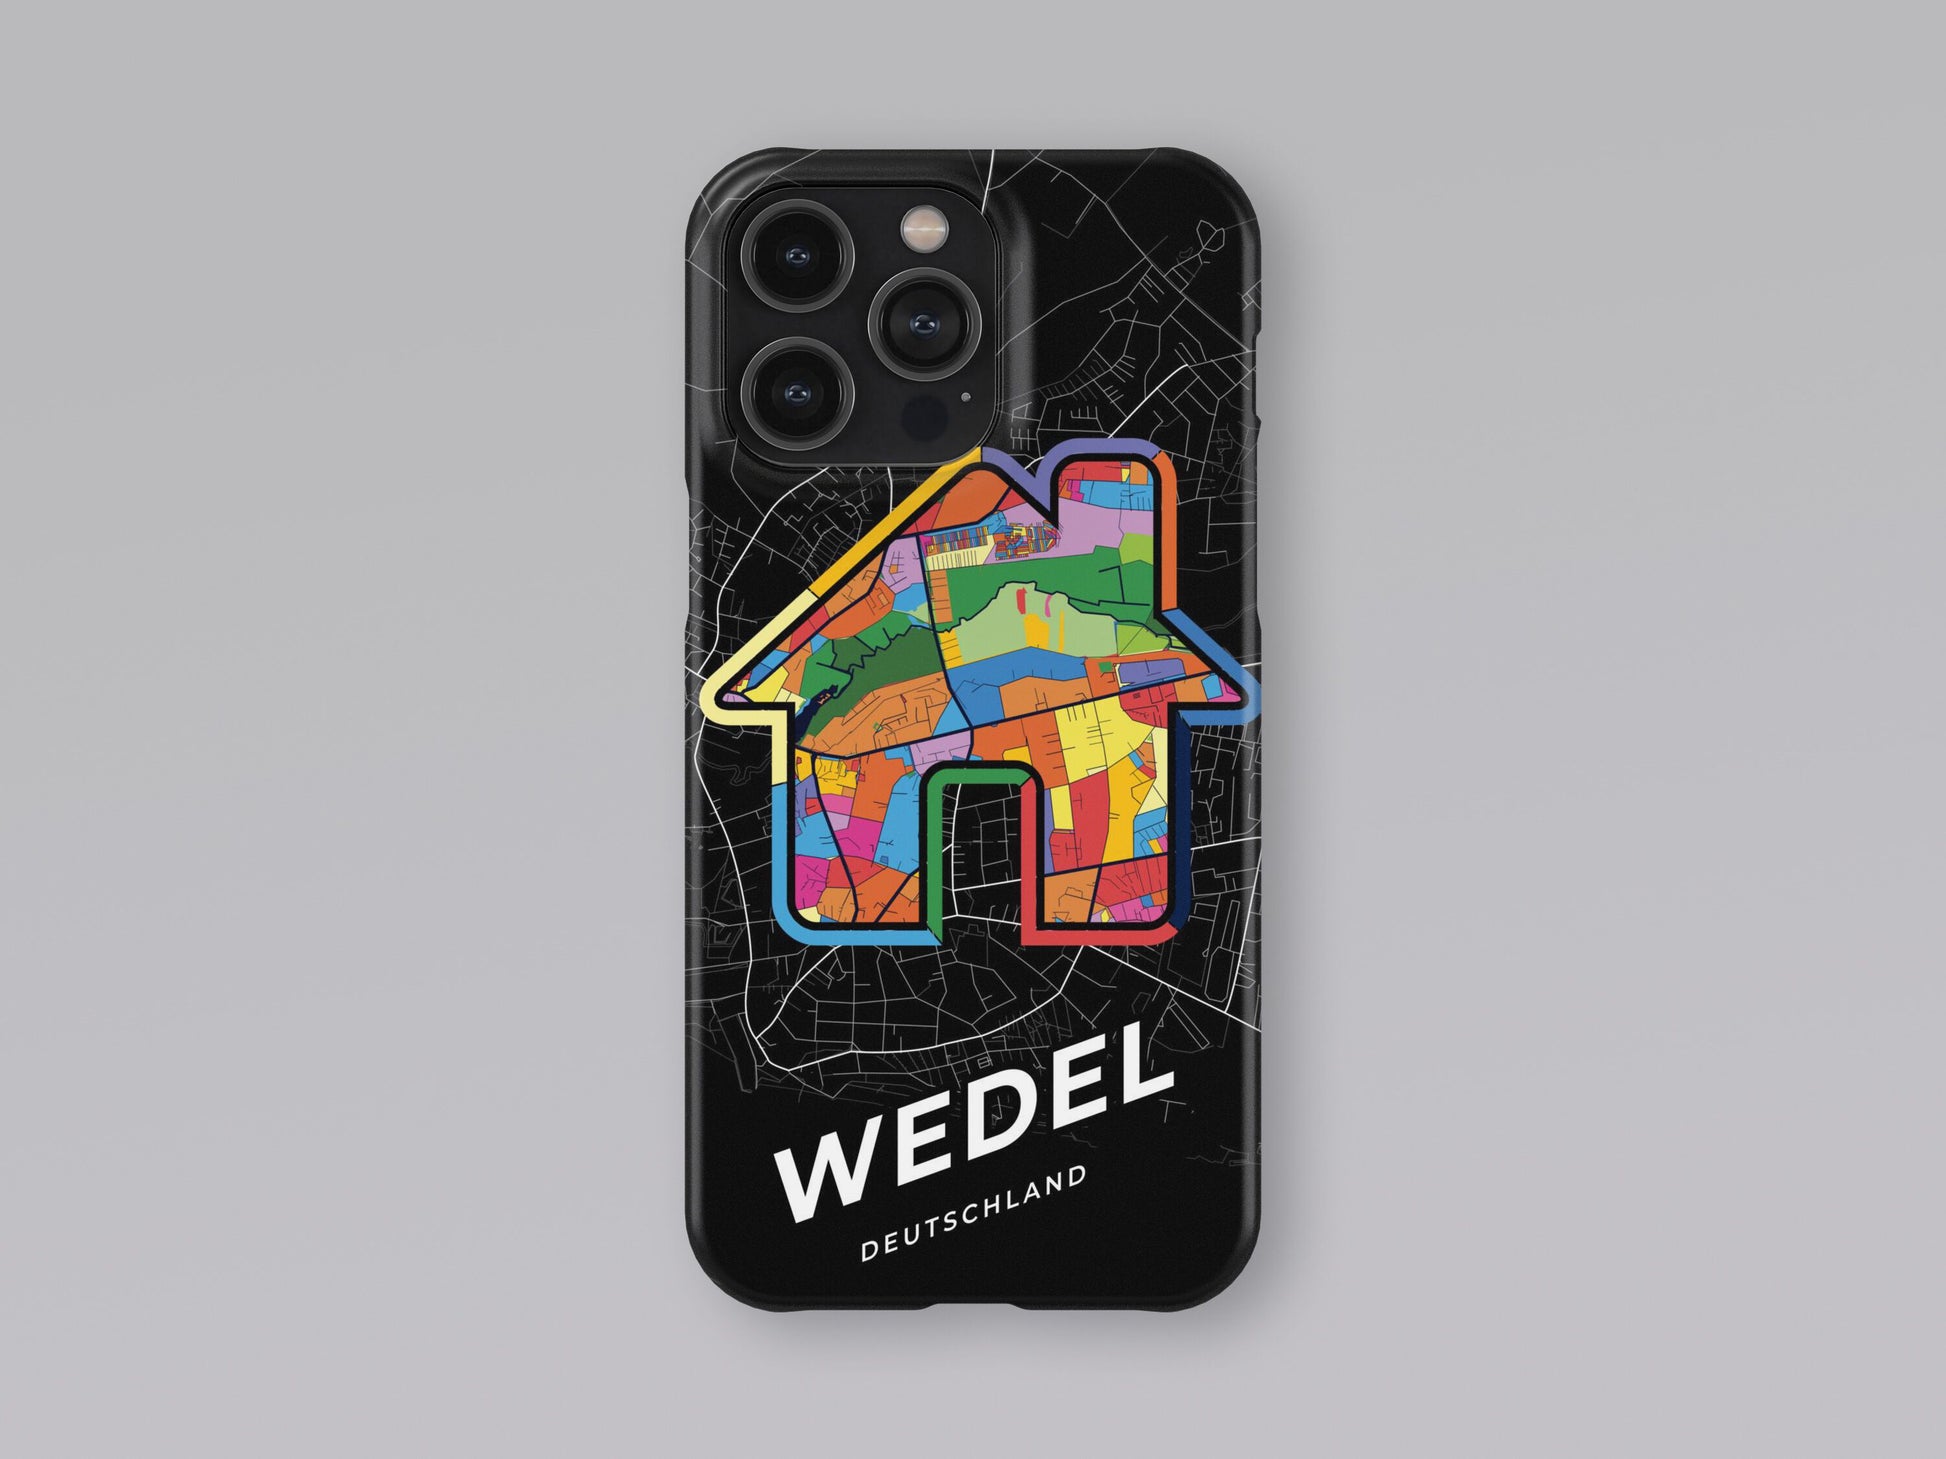 Wedel Deutschland slim phone case with colorful icon 3